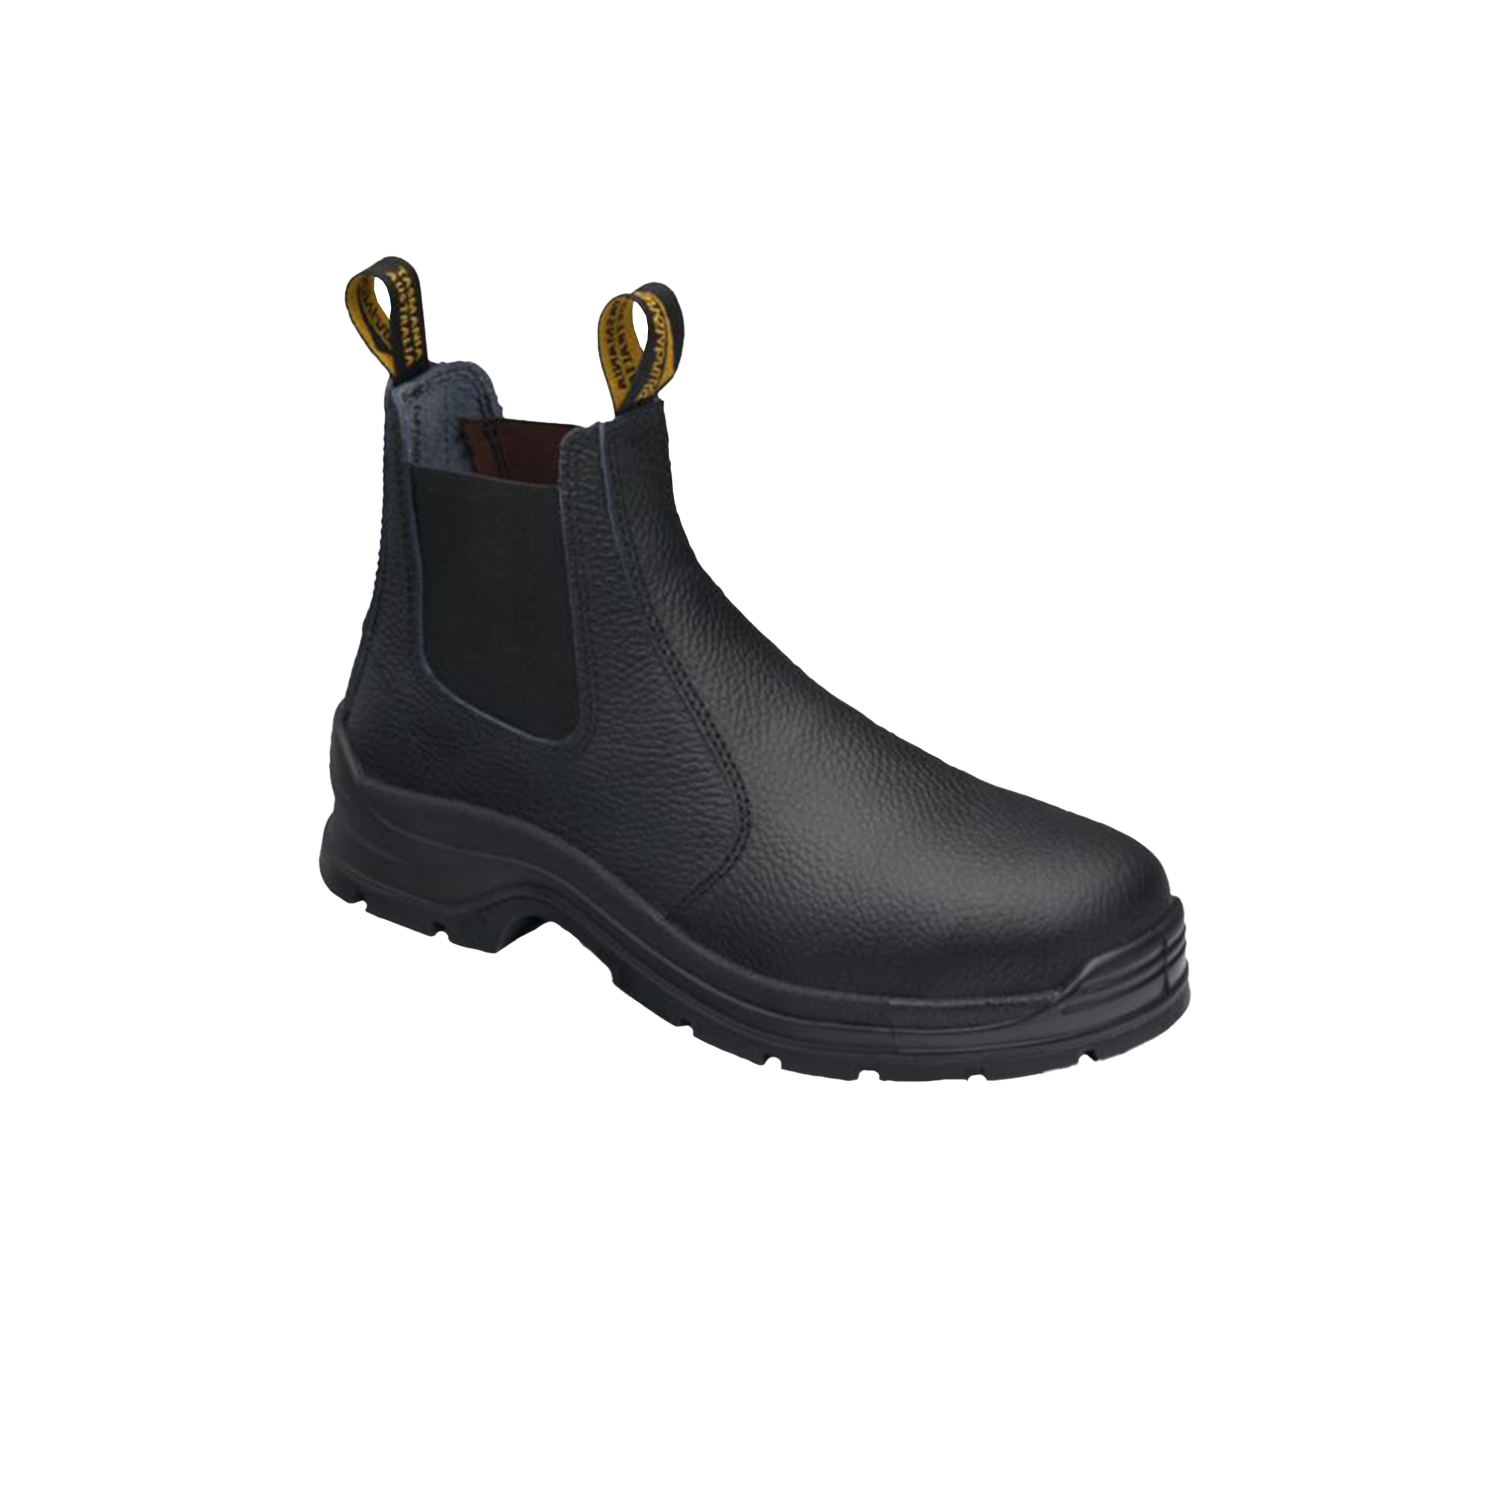 Blundstone 310 Elastic Sided Safety Boots Men's - Black - Totally Workwear